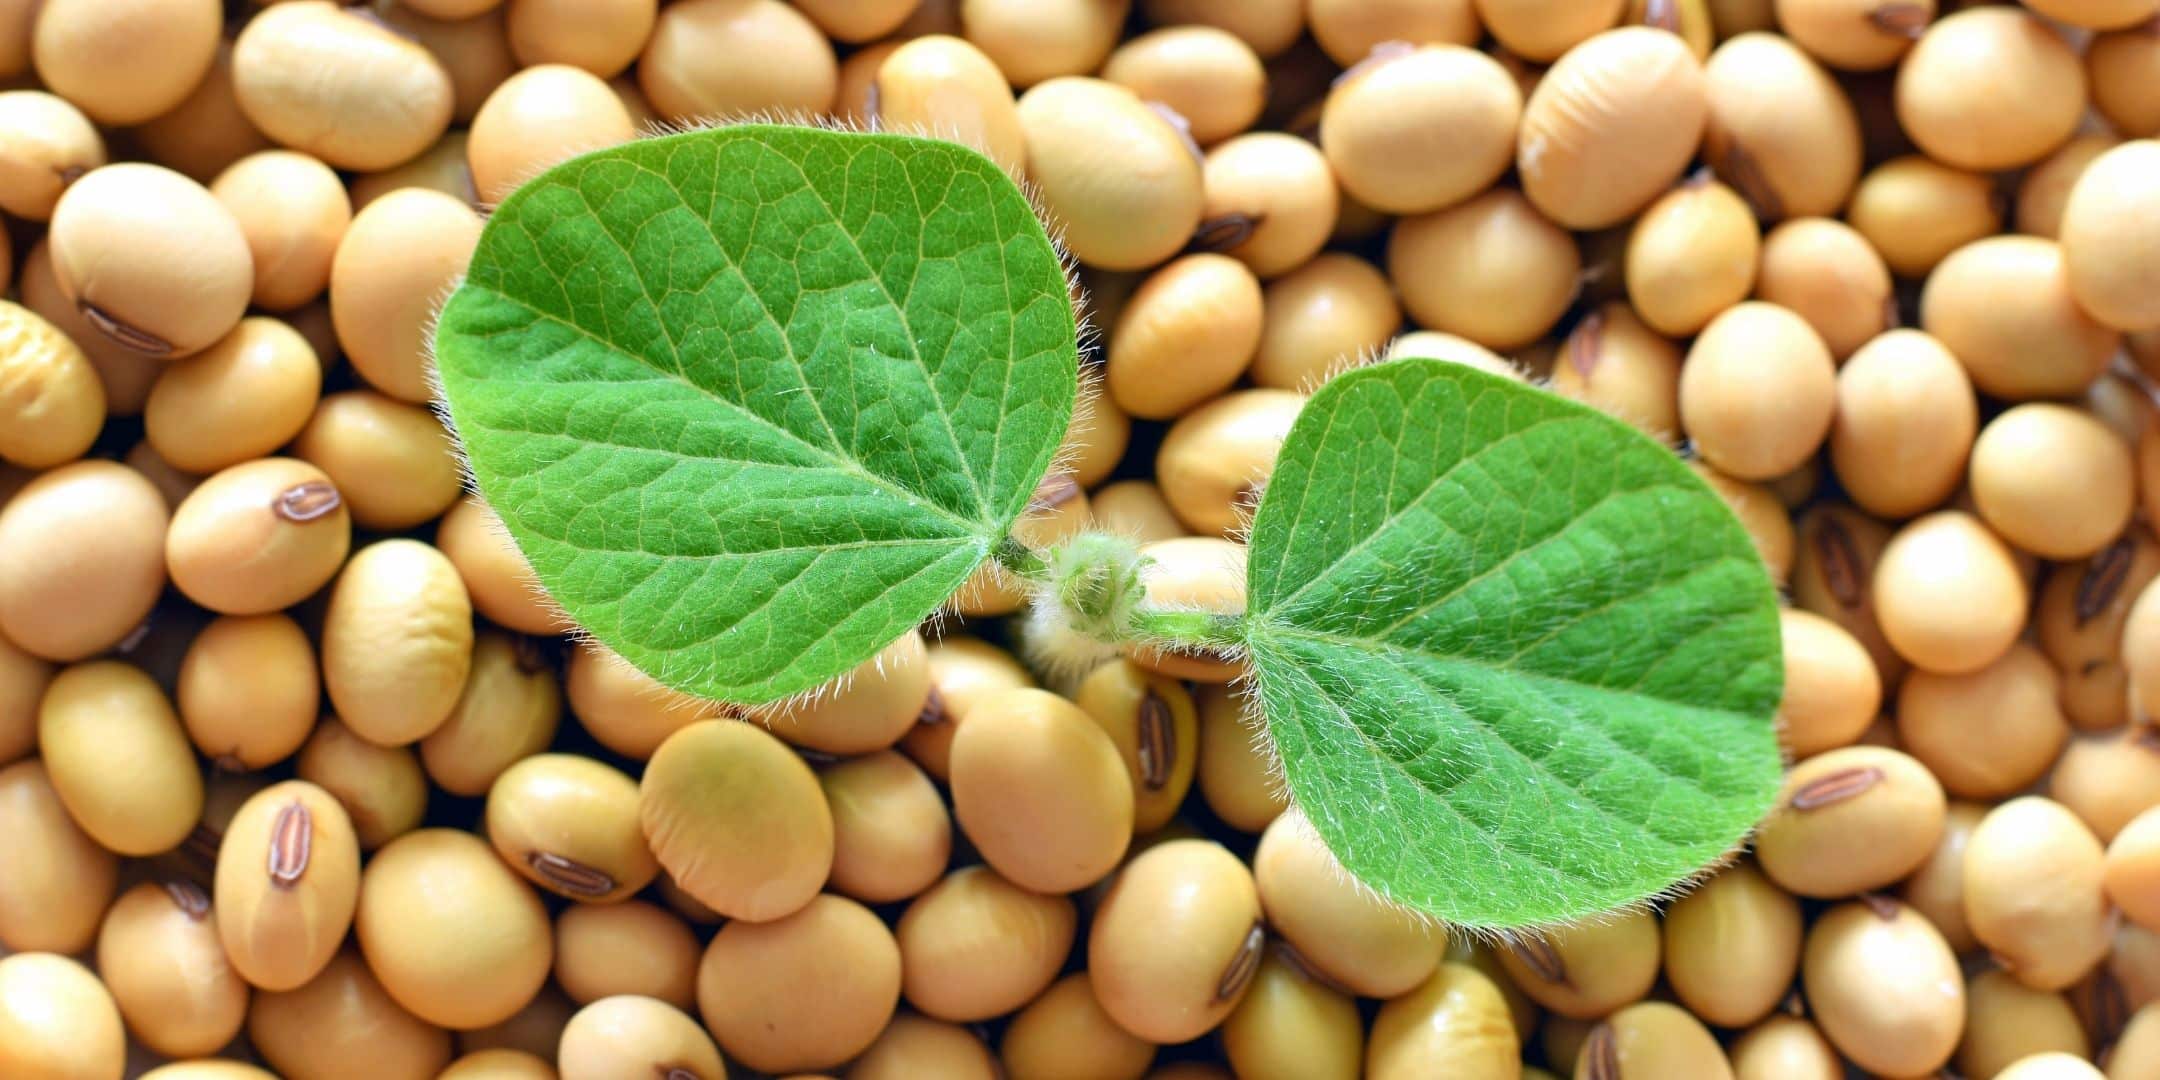 soy beans with a soybean plant with leaves in the middle